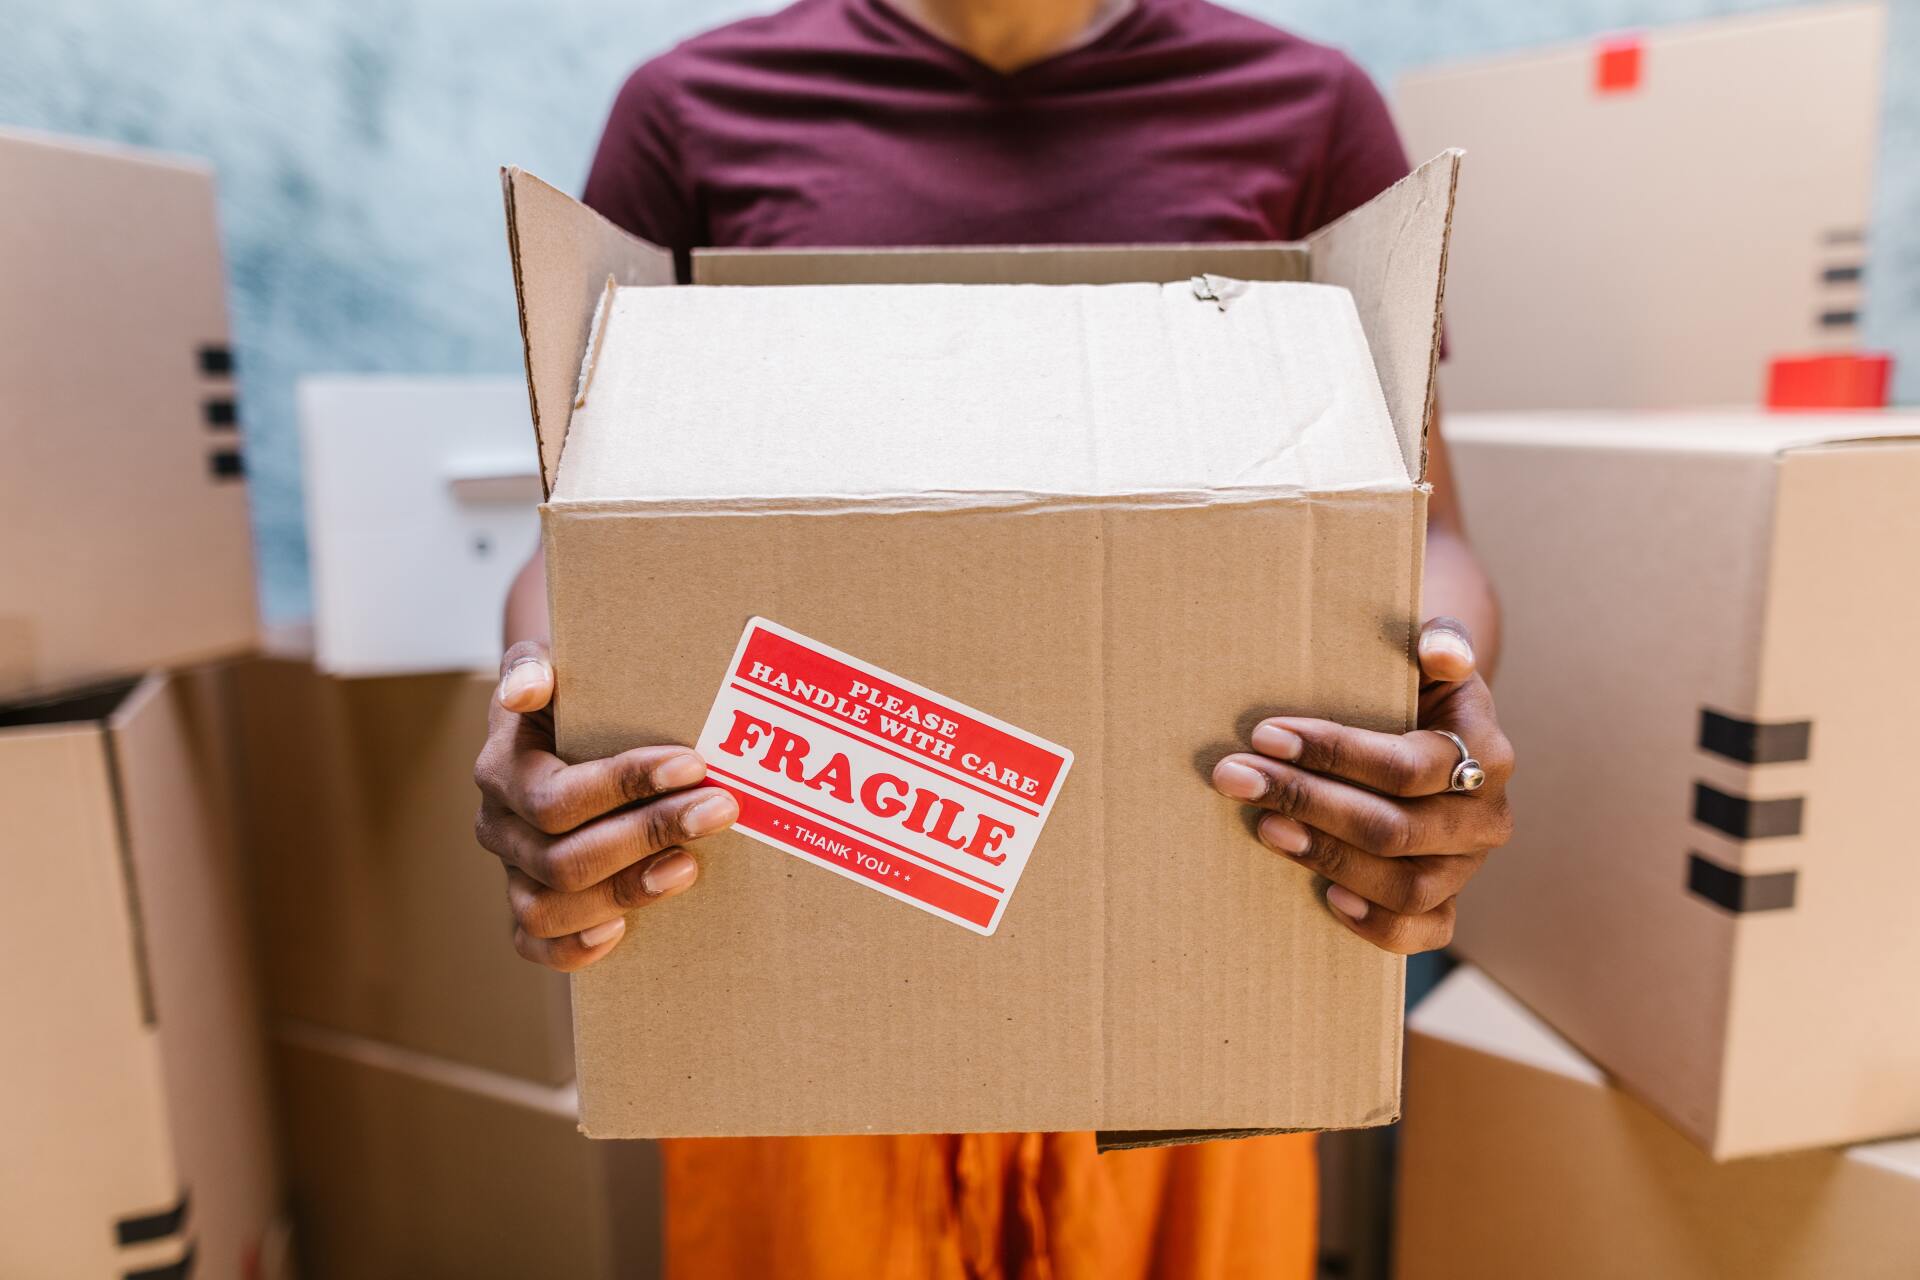 Woman holding a box with fragile sticker